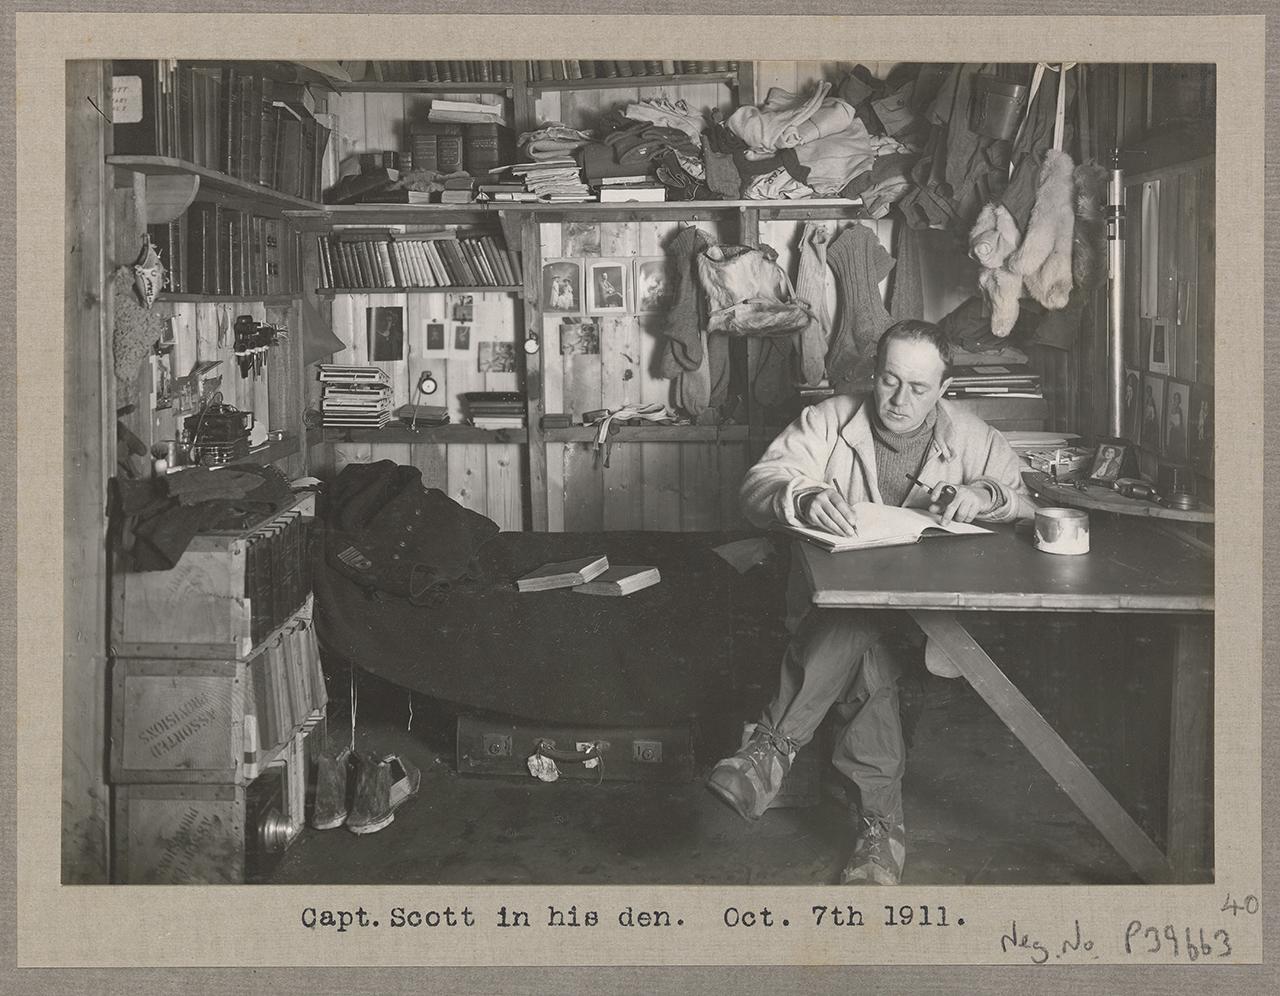 Captain Scott writing his journal before the South Pole expedition in 1911